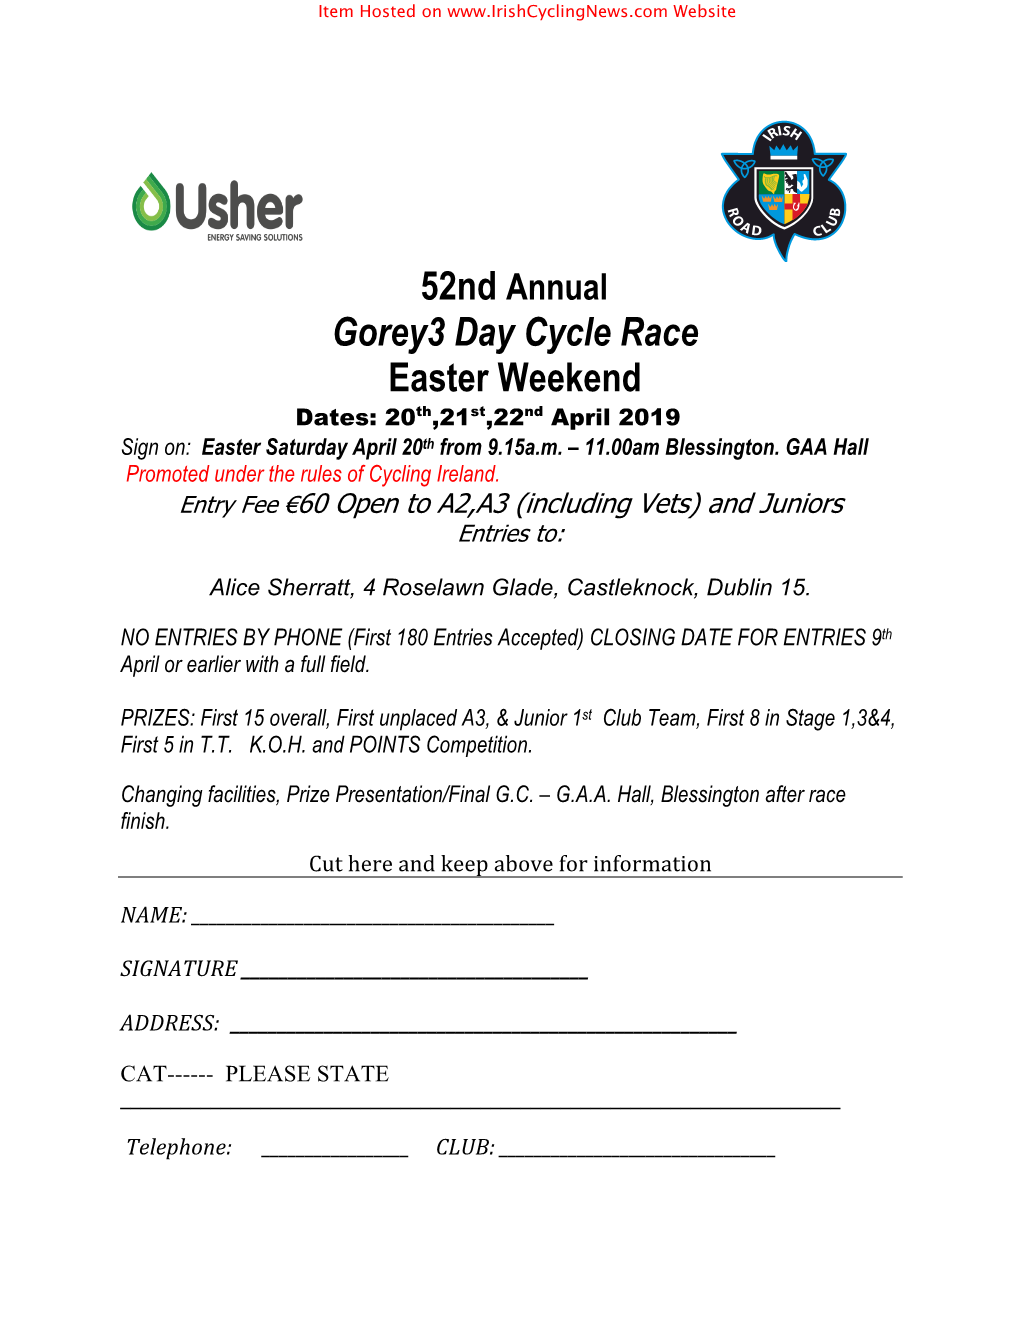 Gorey3 Day Cycle Race Easter Weekend Dates: 20Th,21St,22Nd April 2019 Sign On: Easter Saturday April 20Th from 9.15A.M